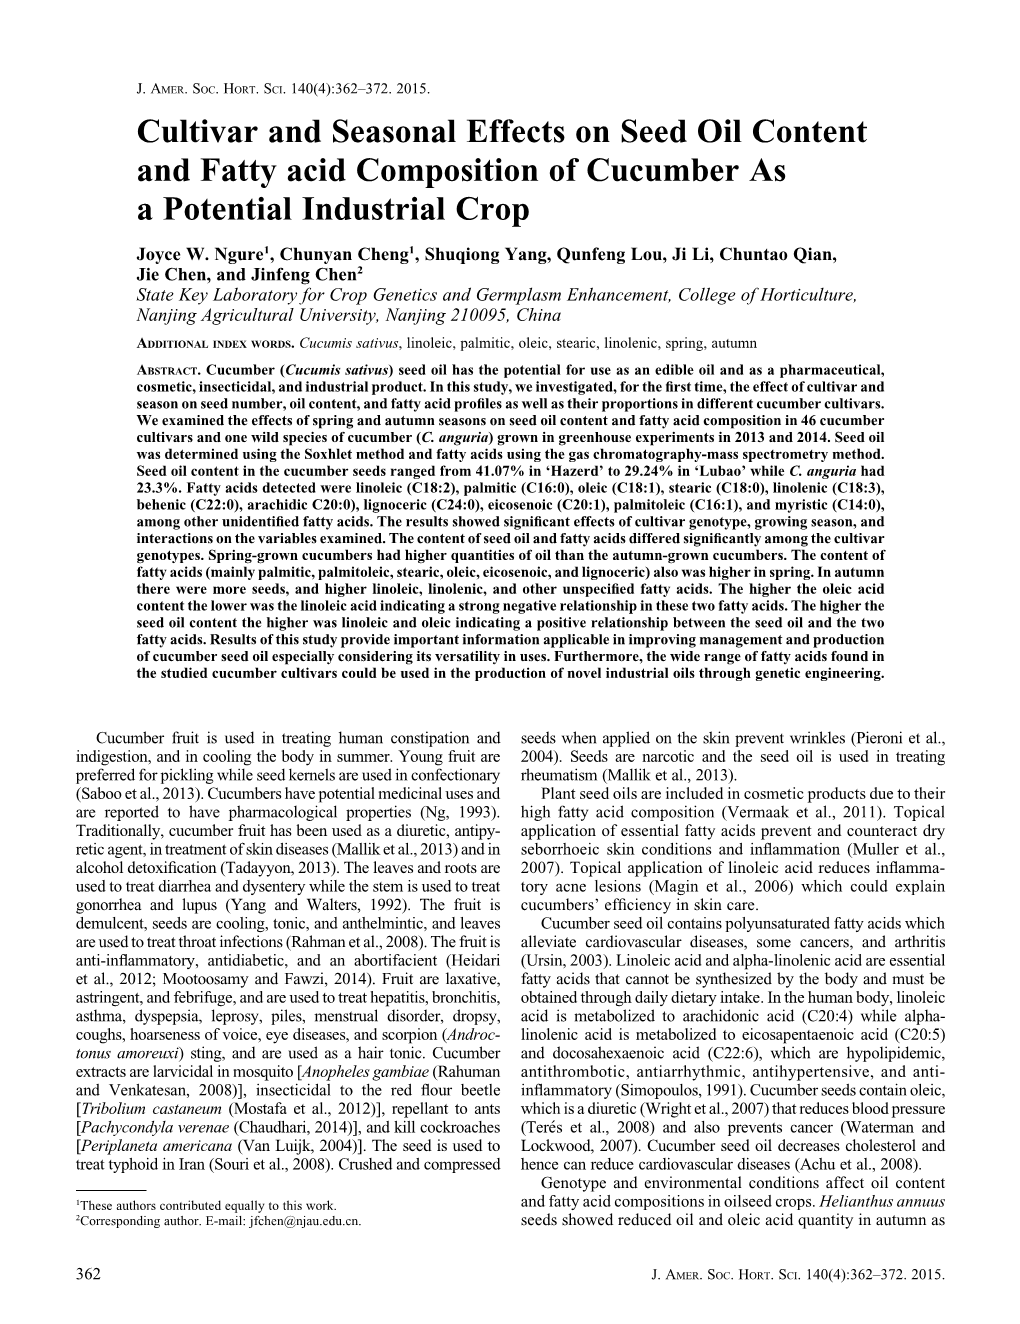 Cultivar and Seasonal Effects on Seed Oil Content and Fatty Acid Composition of Cucumber As a Potential Industrial Crop